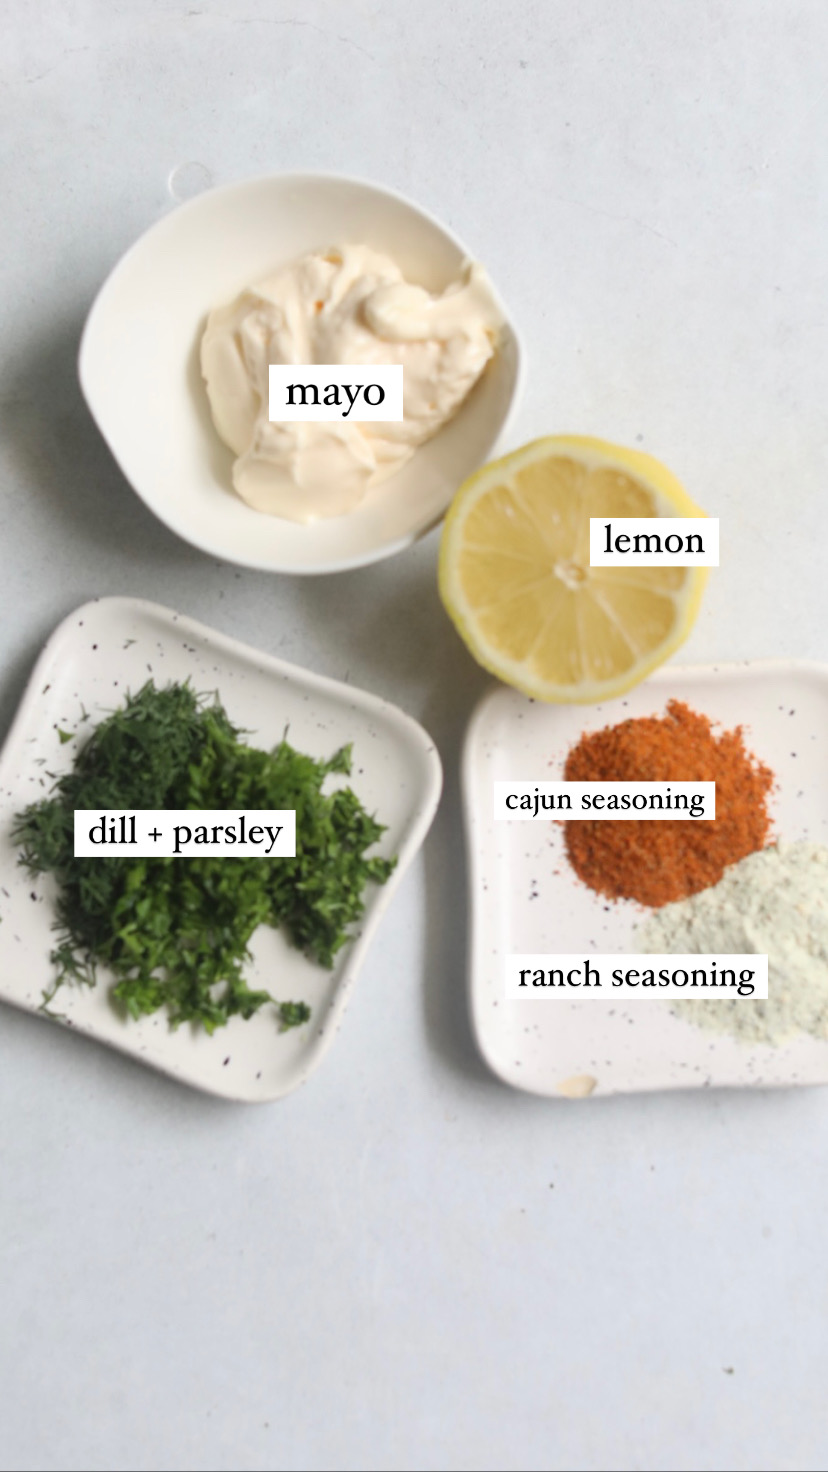 Creamed herb dressing ingredients in a flat lay. Small white bowl of mayo, small flat plates of fresh herbs and seasonings and one half of a lemon.